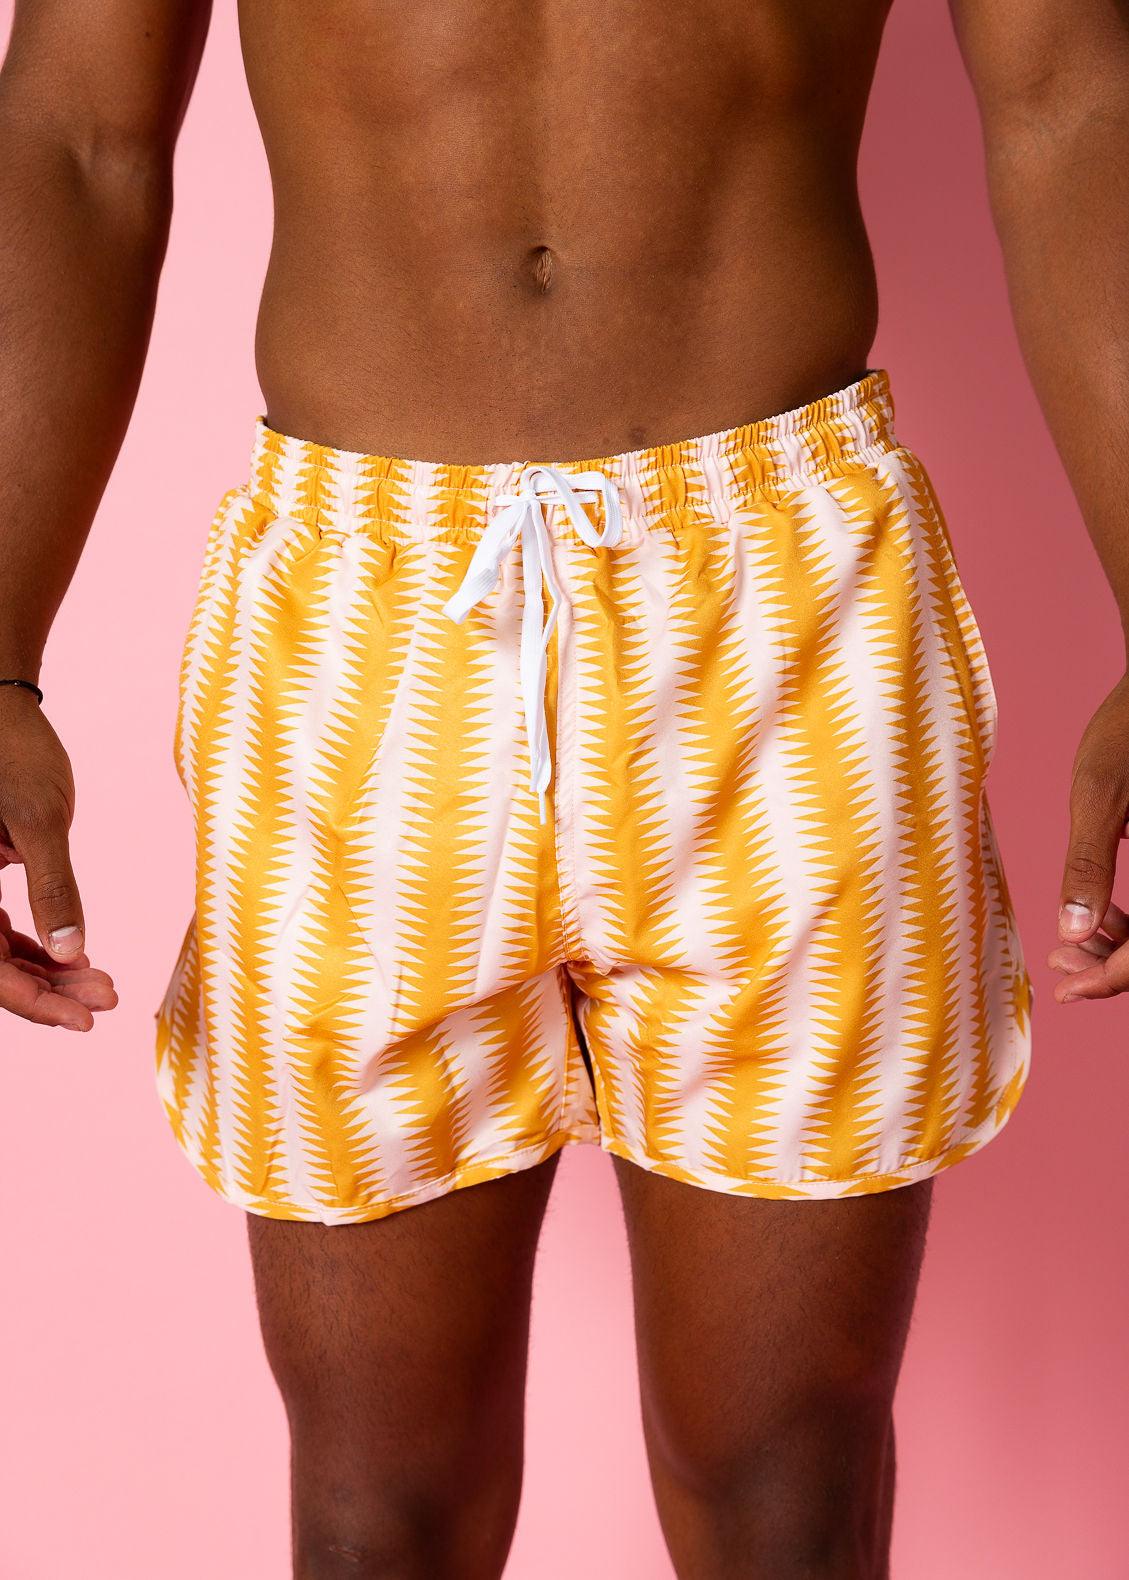 Mens Swimsuit - Shorts - Vintage Triangles